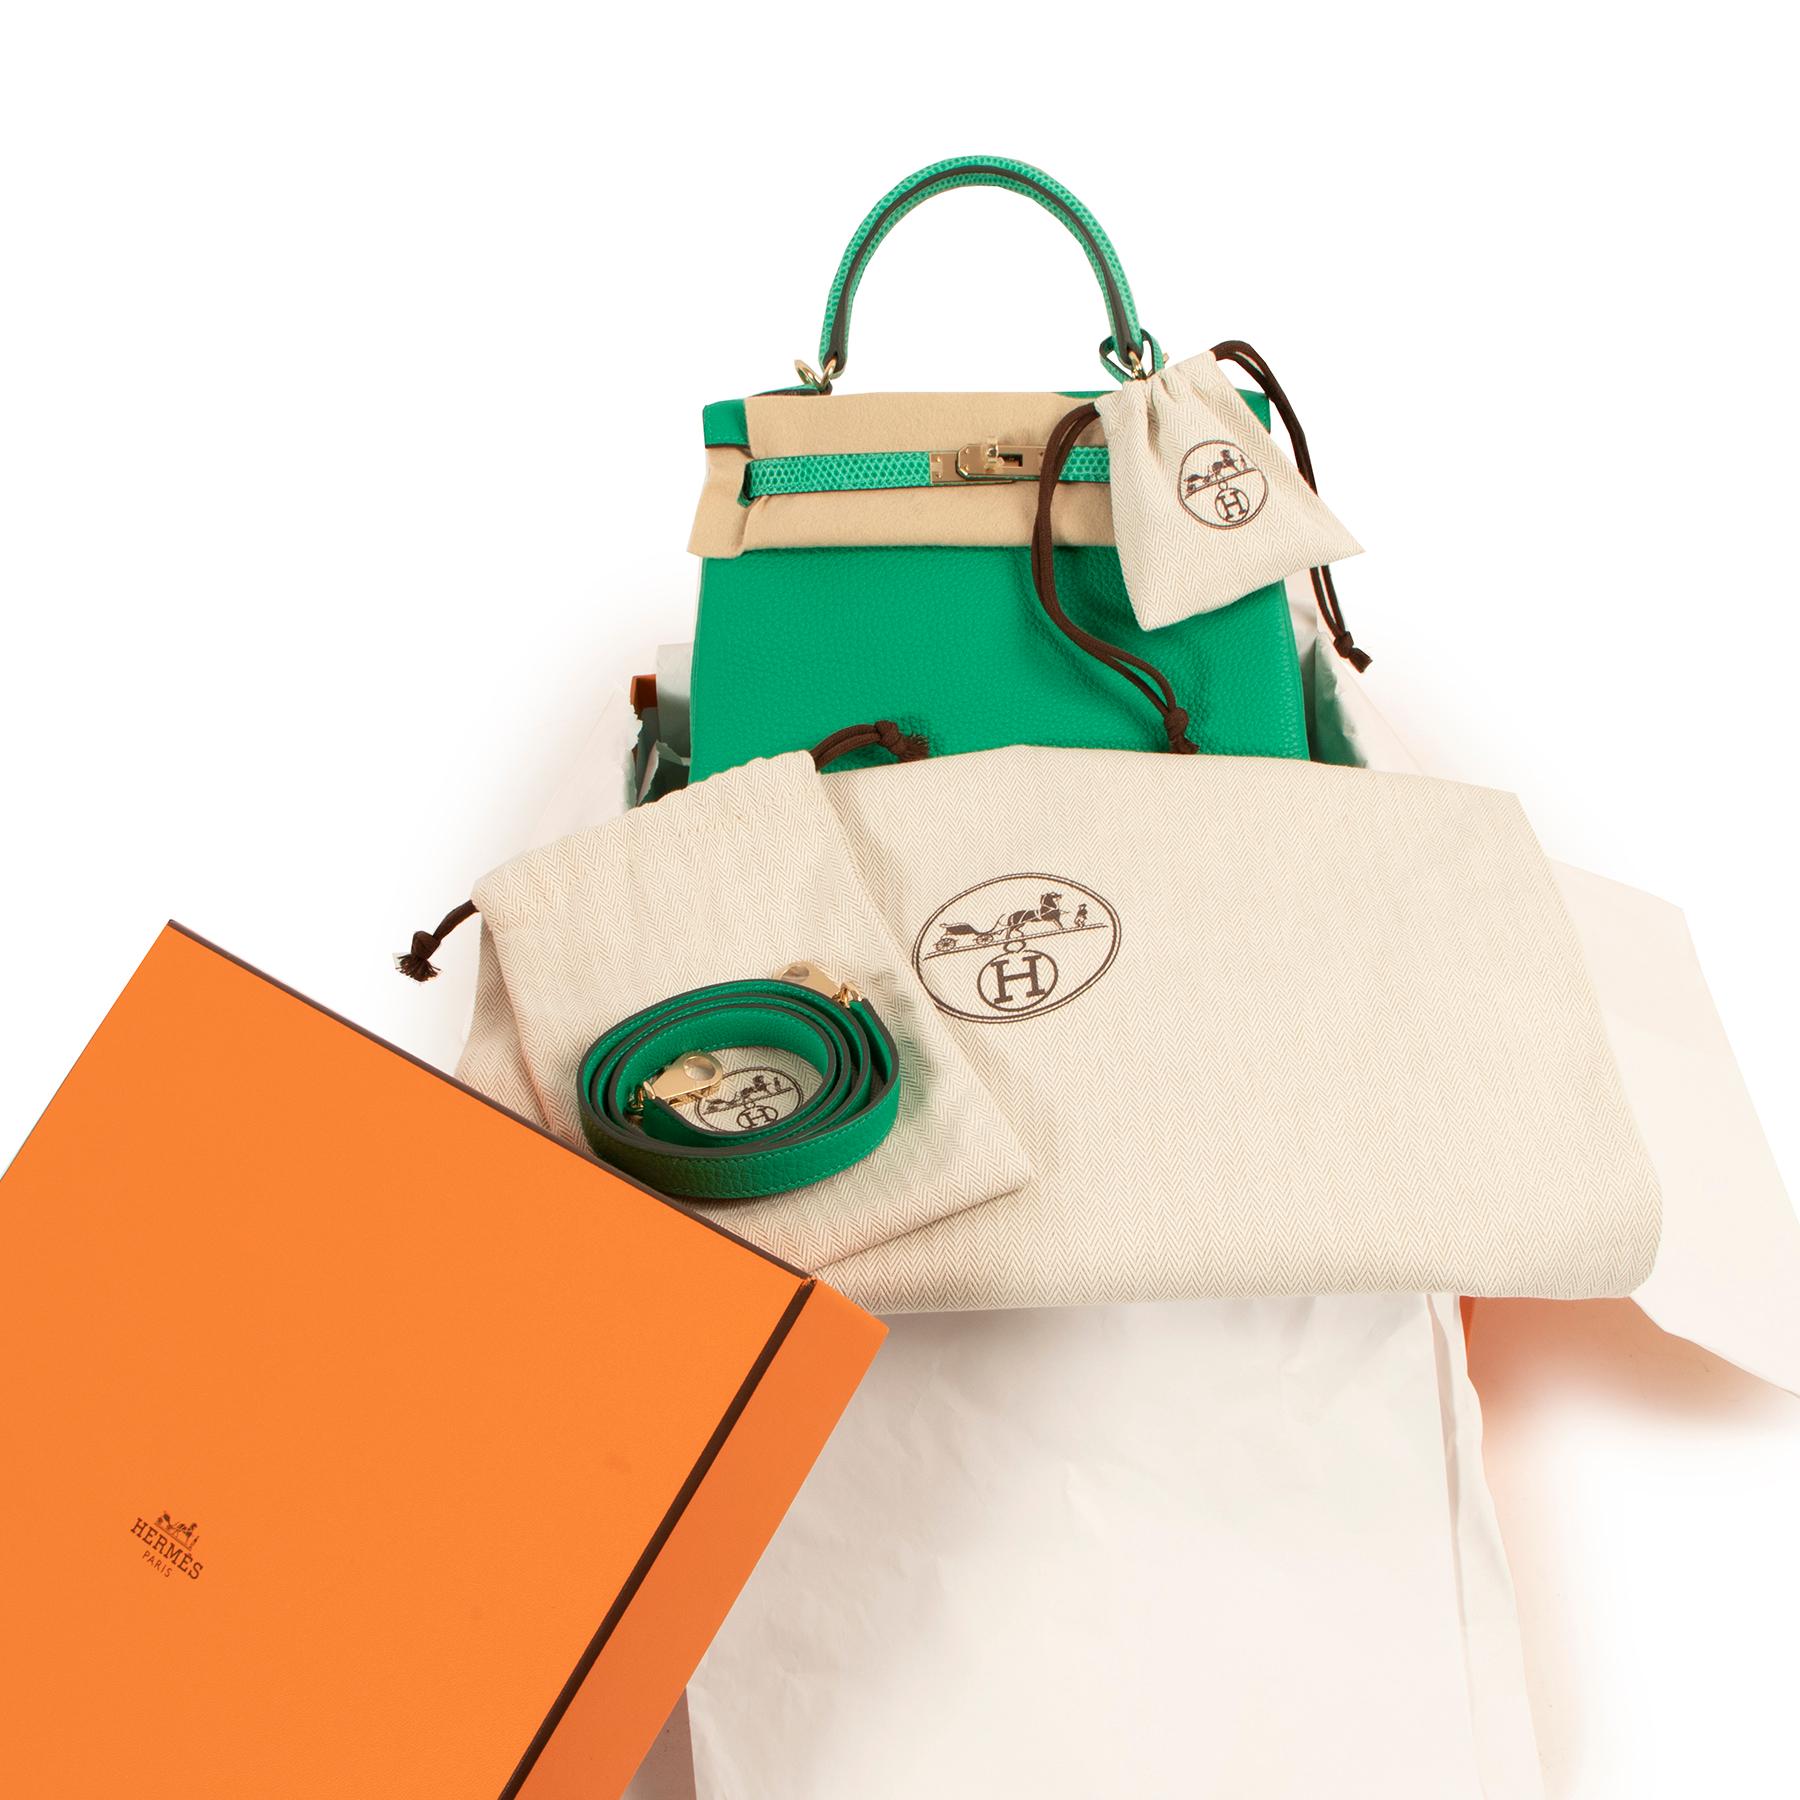 Hermès Kelly Touch 25 Vert Menthe Lezard/Togo Permabrass Hardware

This exclusive Hermès Kelly 25 Touch is is one of these true collector's items. It's handmade from precious Lizard skin leather and Togo calfskin leather, creating an exotic touch